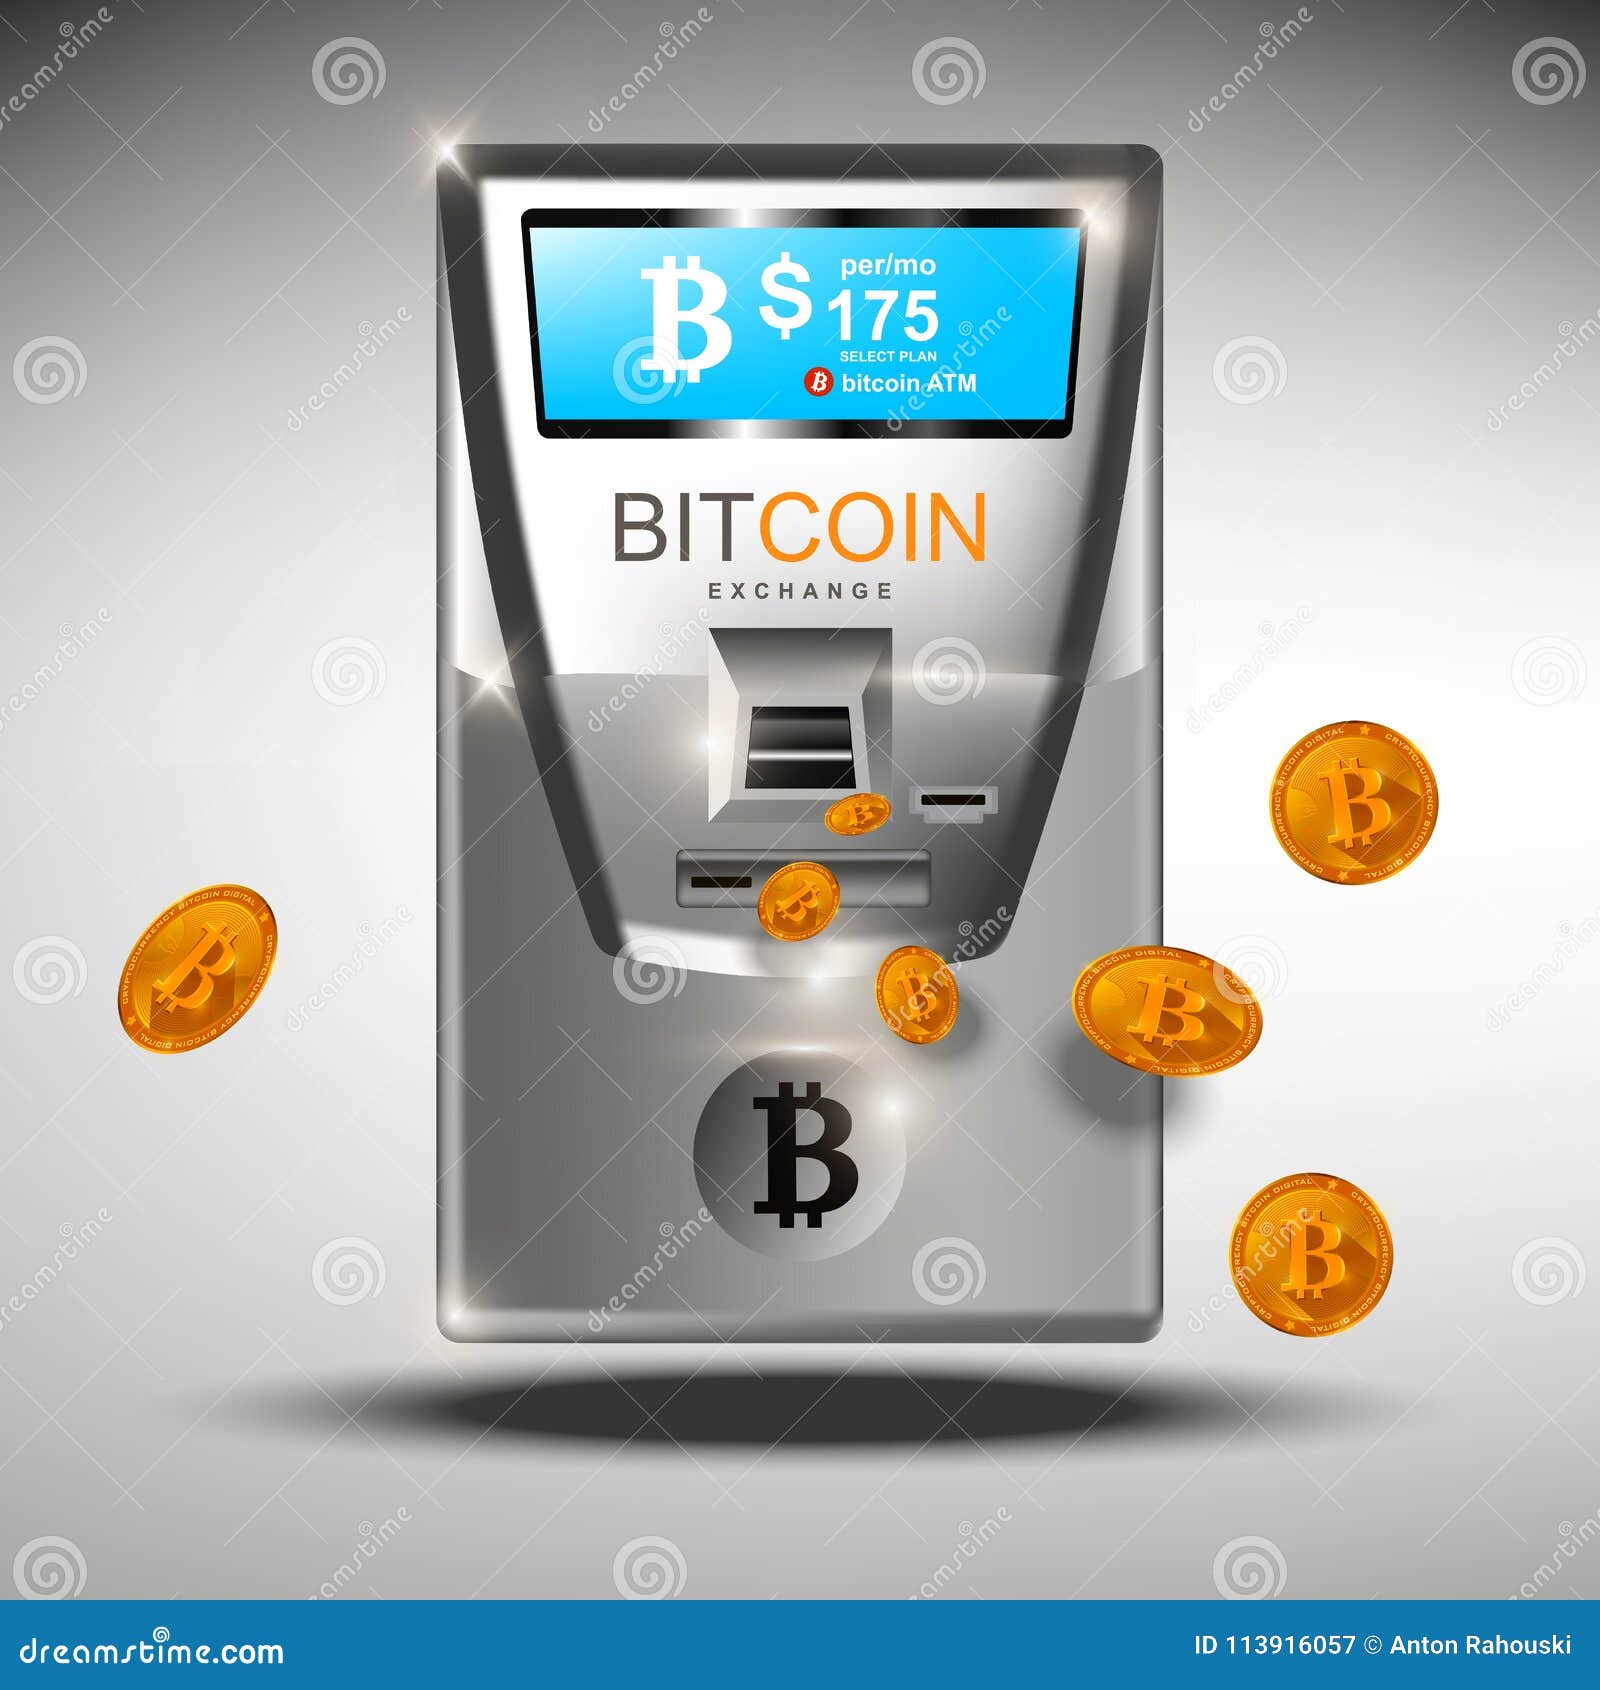 Bitcoin Atm Automated Machine Atm Bitcoins Cash Machine Vect!   or - 